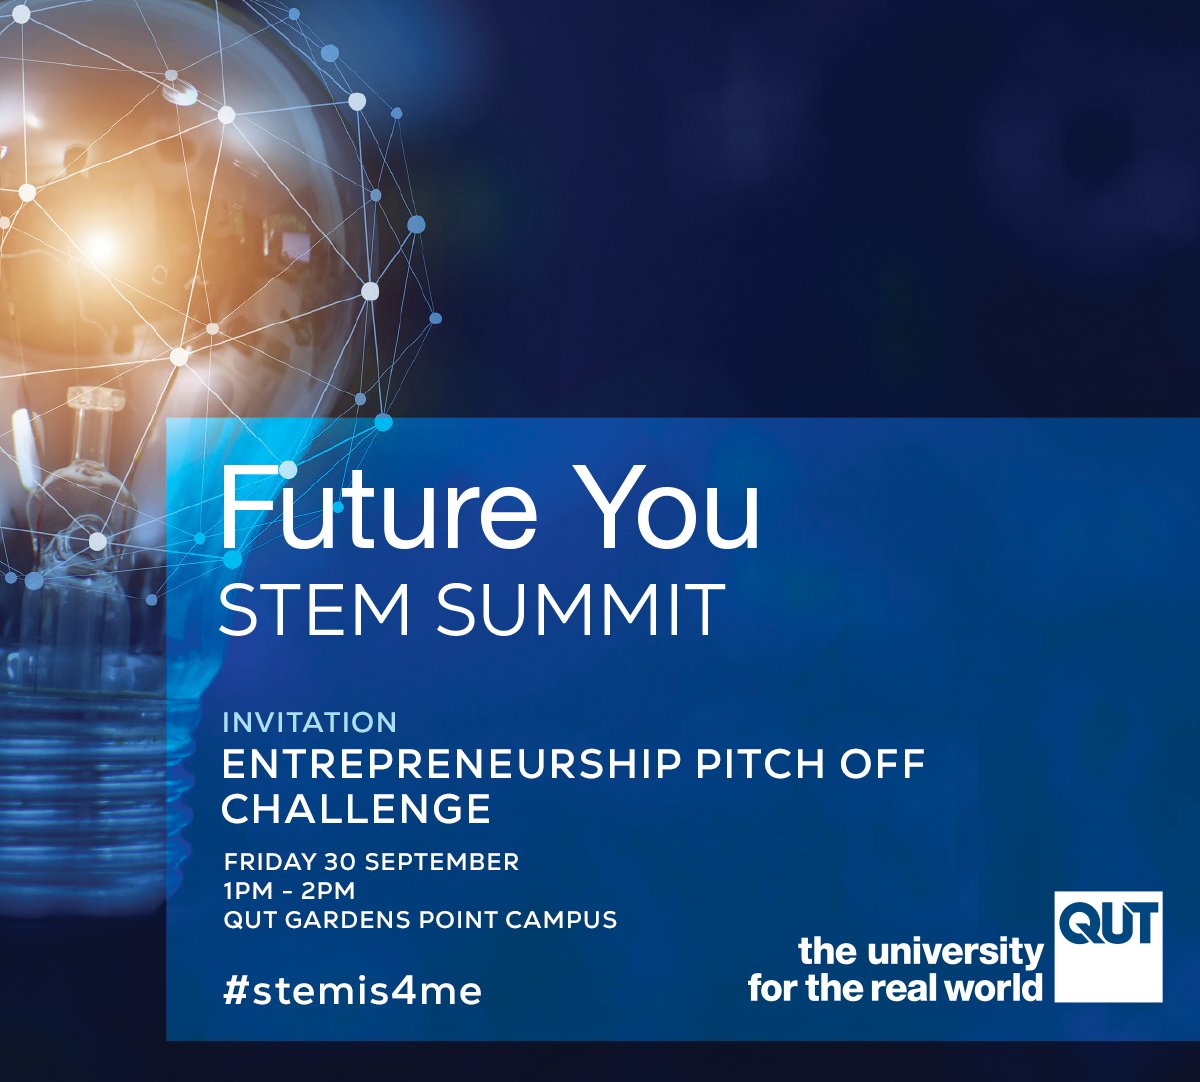 As an “investor” you will hear students put their ideas to the test with an elevator pitch to crowdfund their start up. The team with the most funds raised wins the Entrepreneurship Challenge Please register - eventbrite.com.au/e/entrepreneur… Validated free parking available. #stemis4me